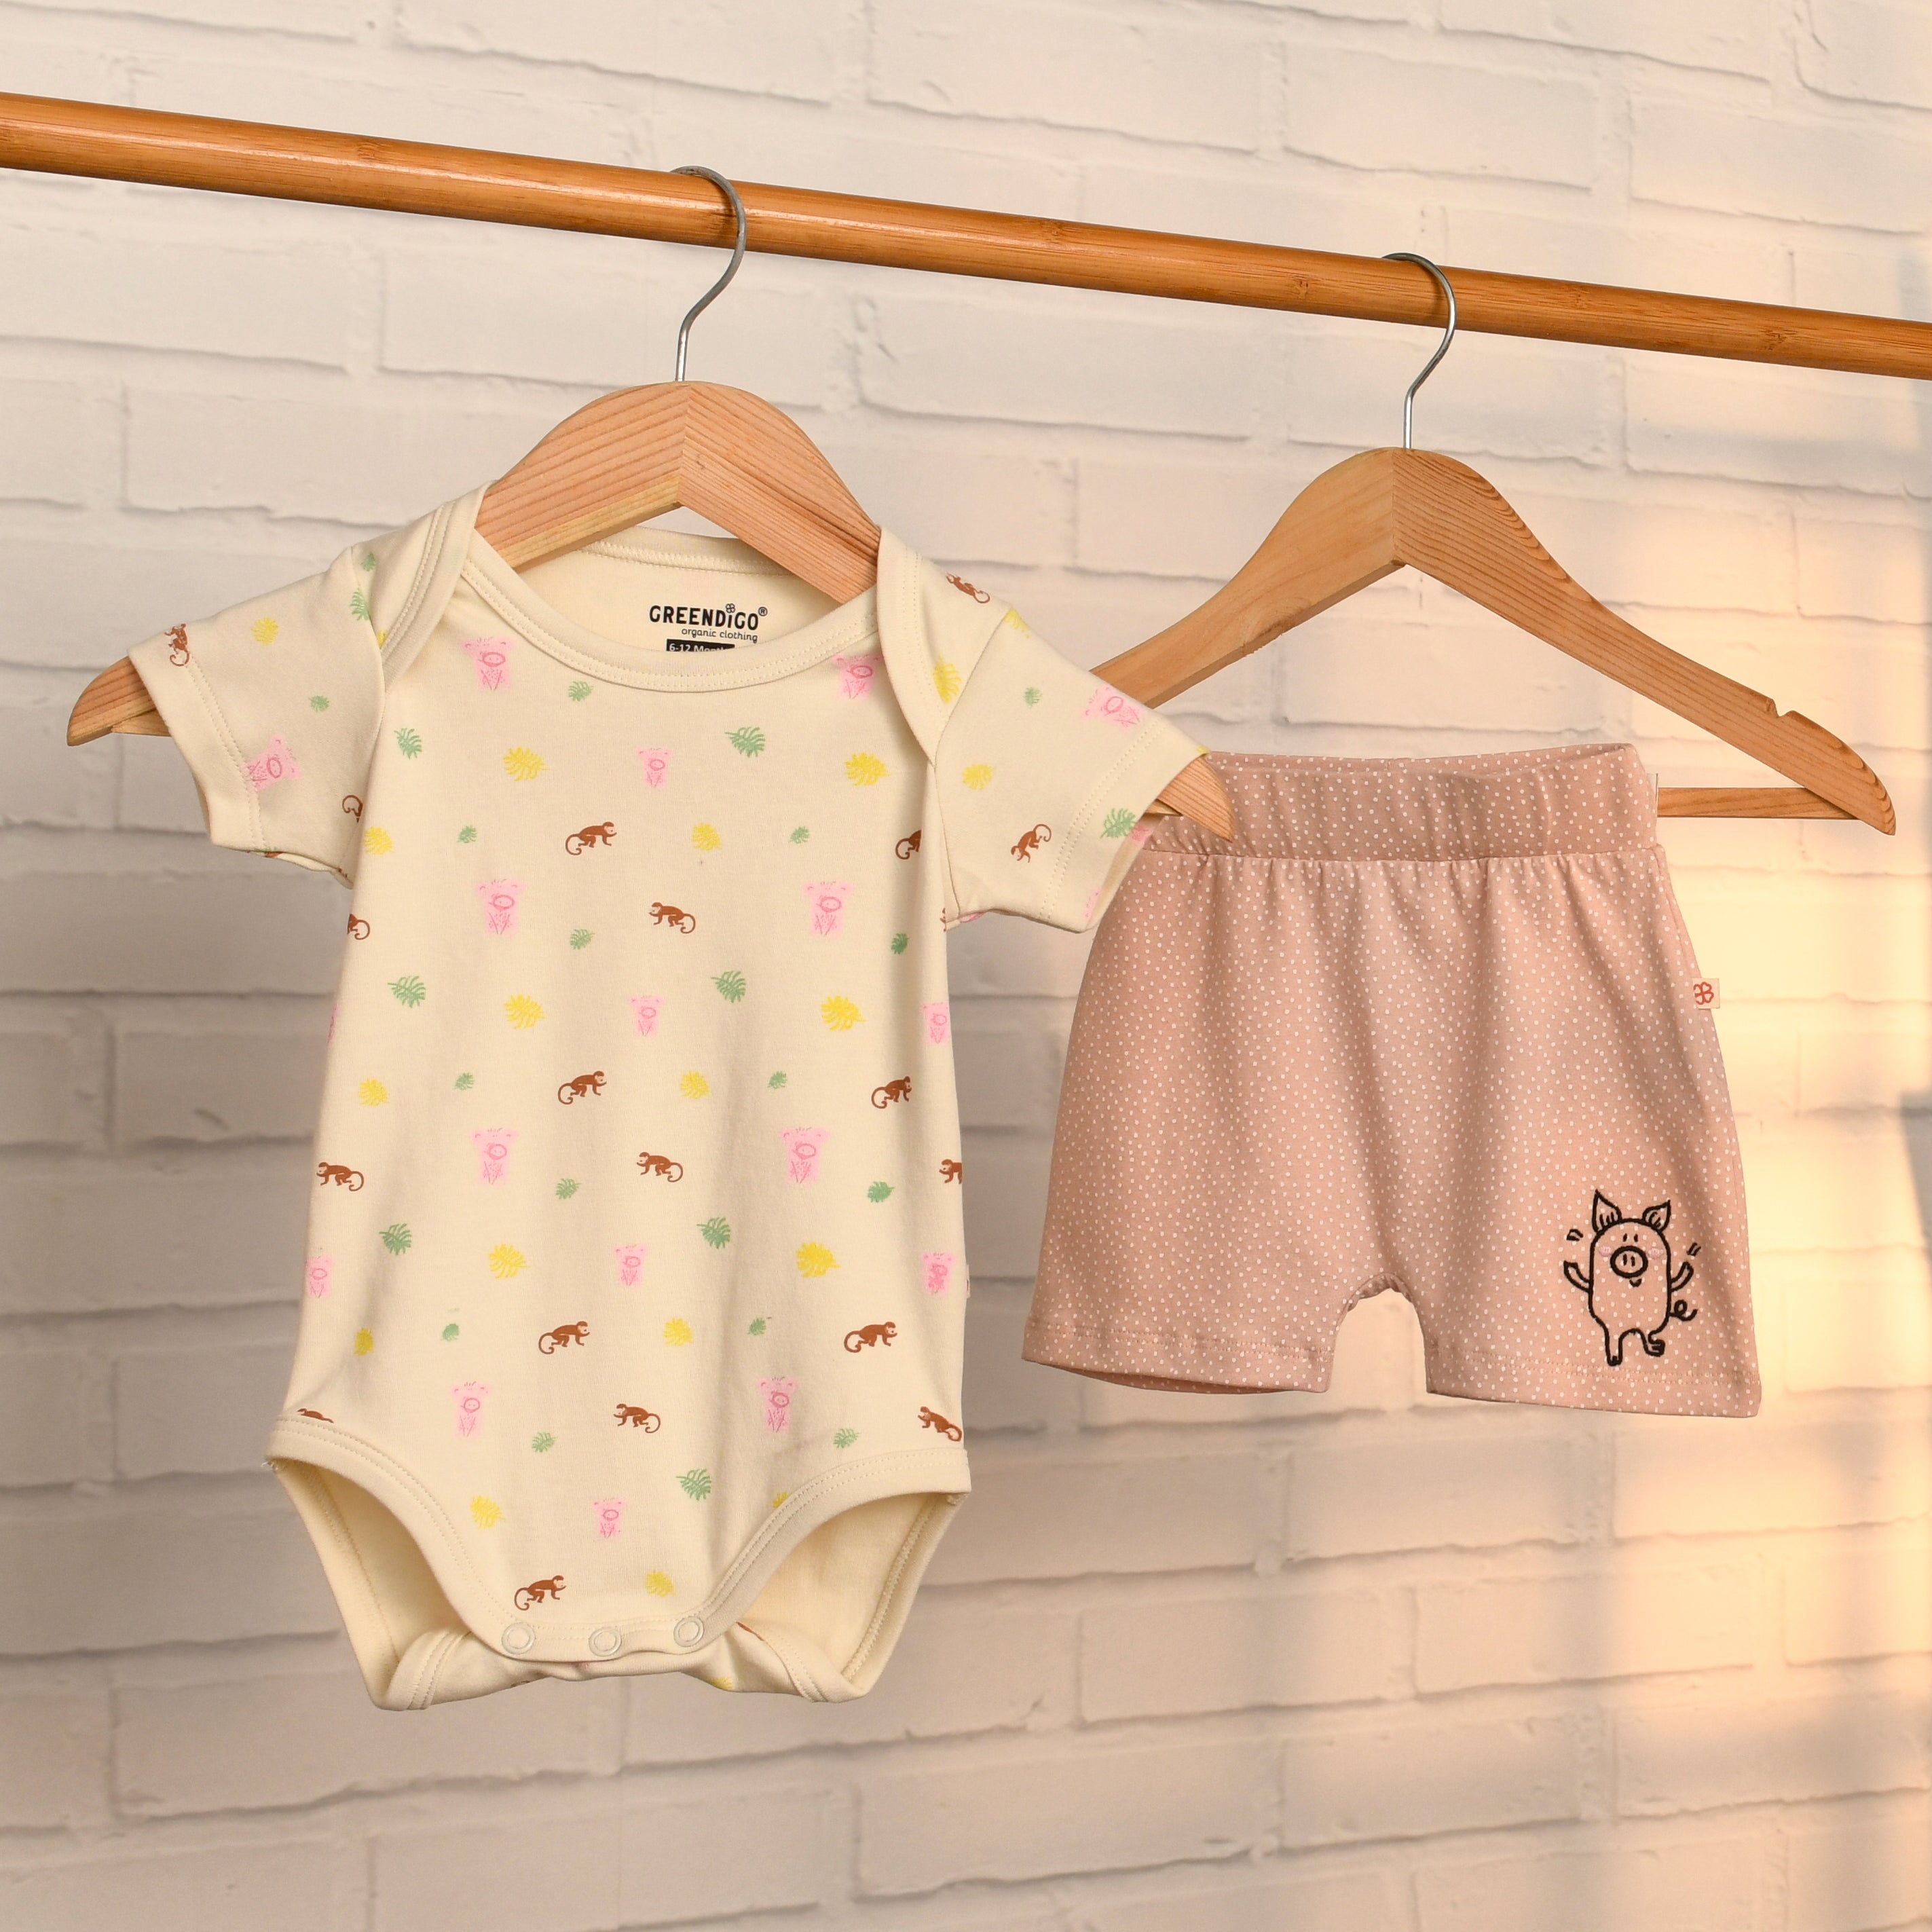 Cute or Chemically Loaded? The Truth About a Single Baby Outfit